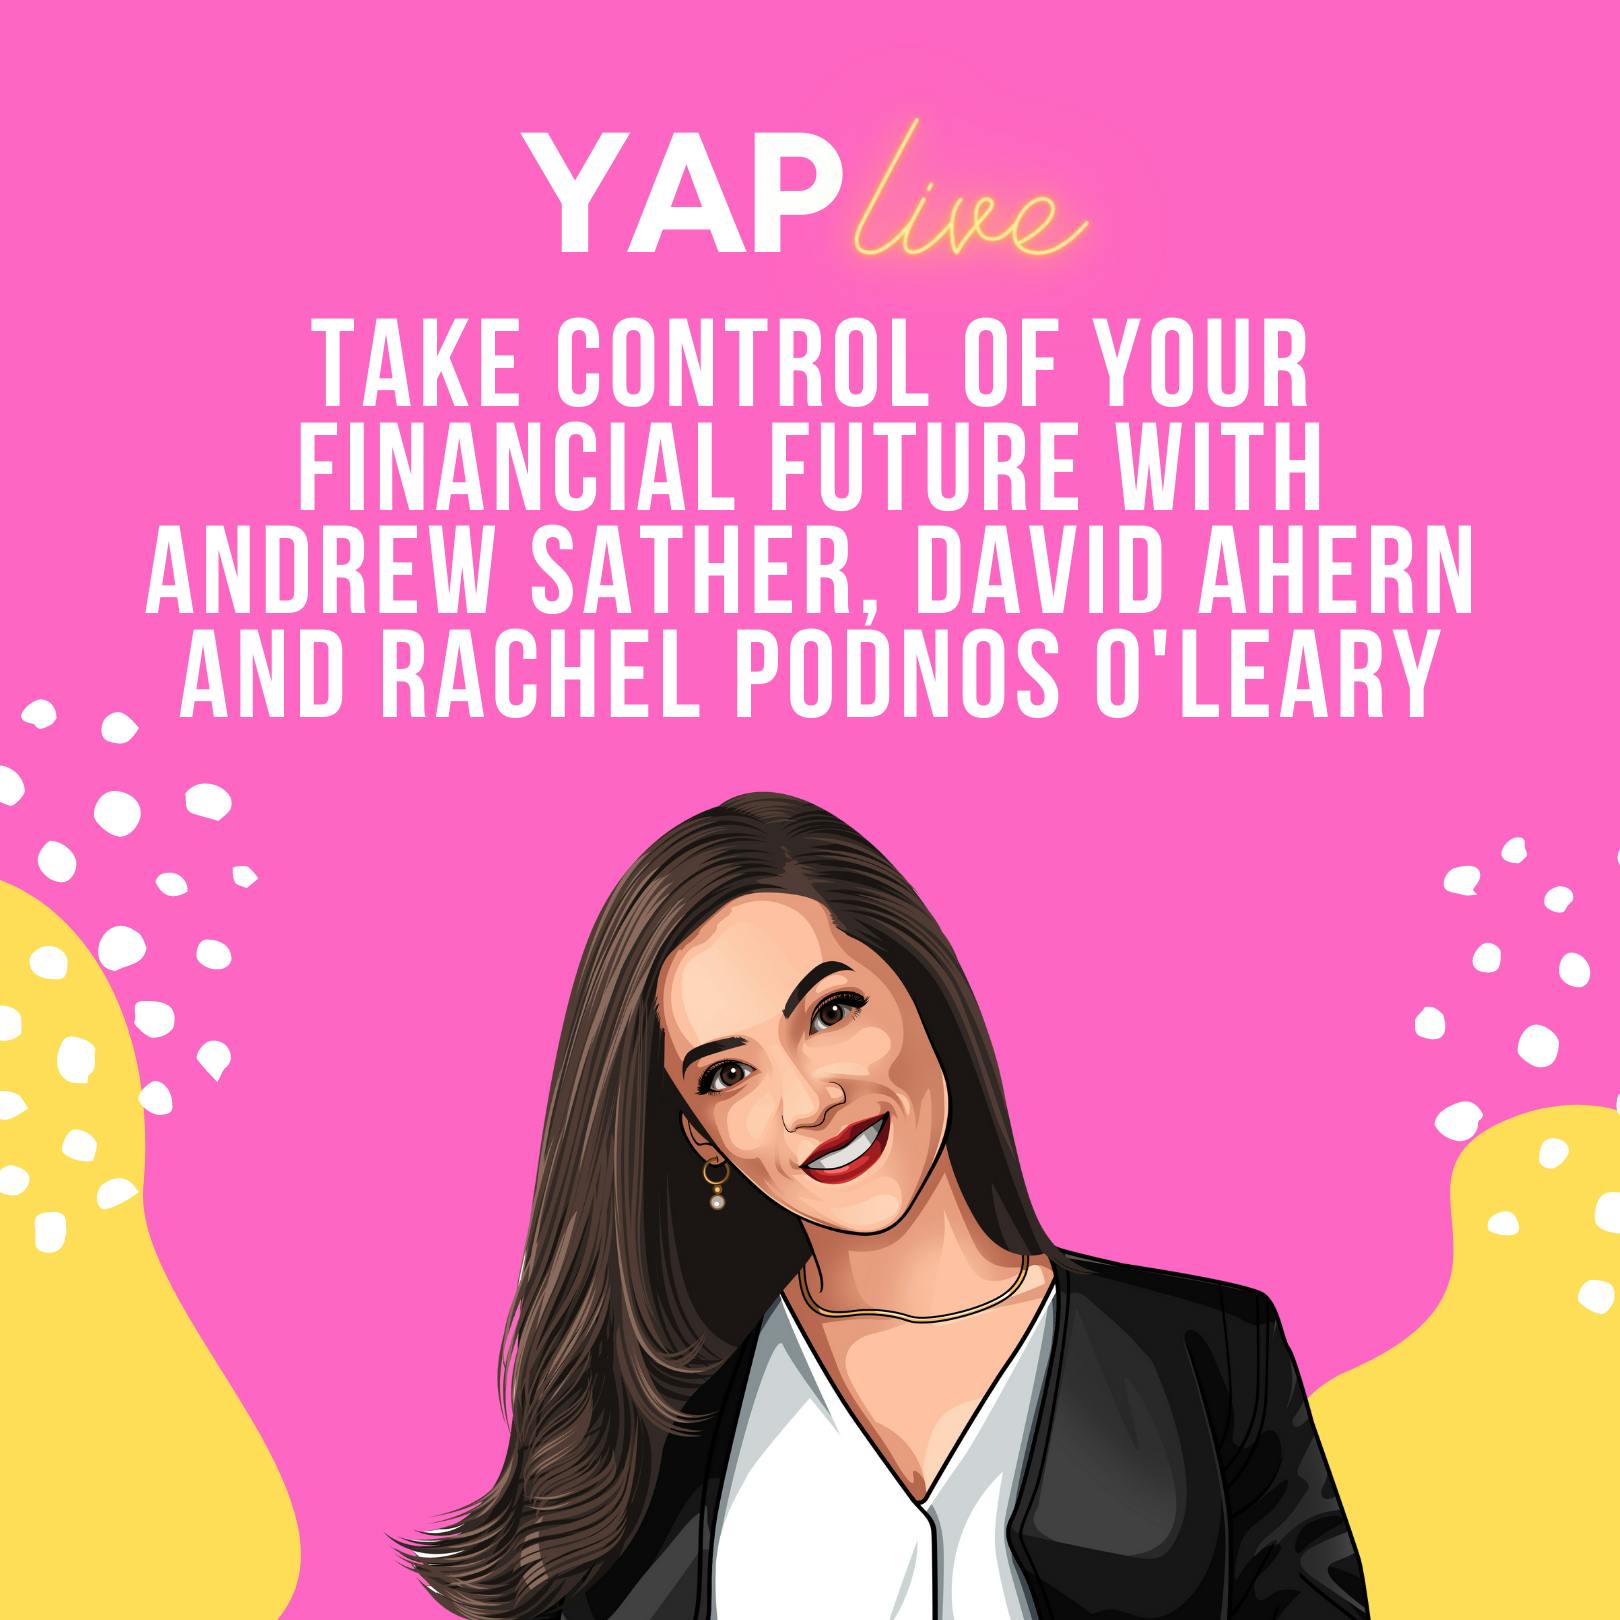 #YAPLive - Take Control Of Your Financial Future with Andrew Sather, David Ahern and Rachel Podnos O'Leary (Cut Version)